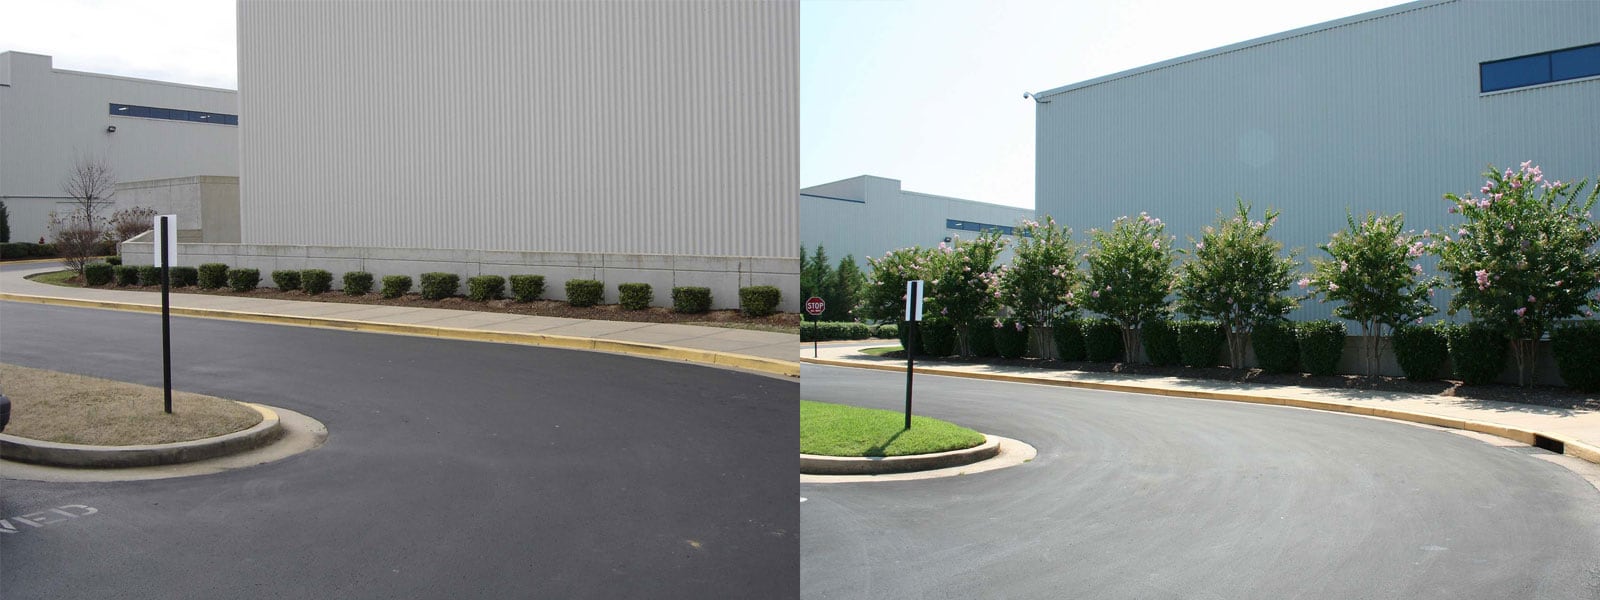 Commercial Landscaping Before and After